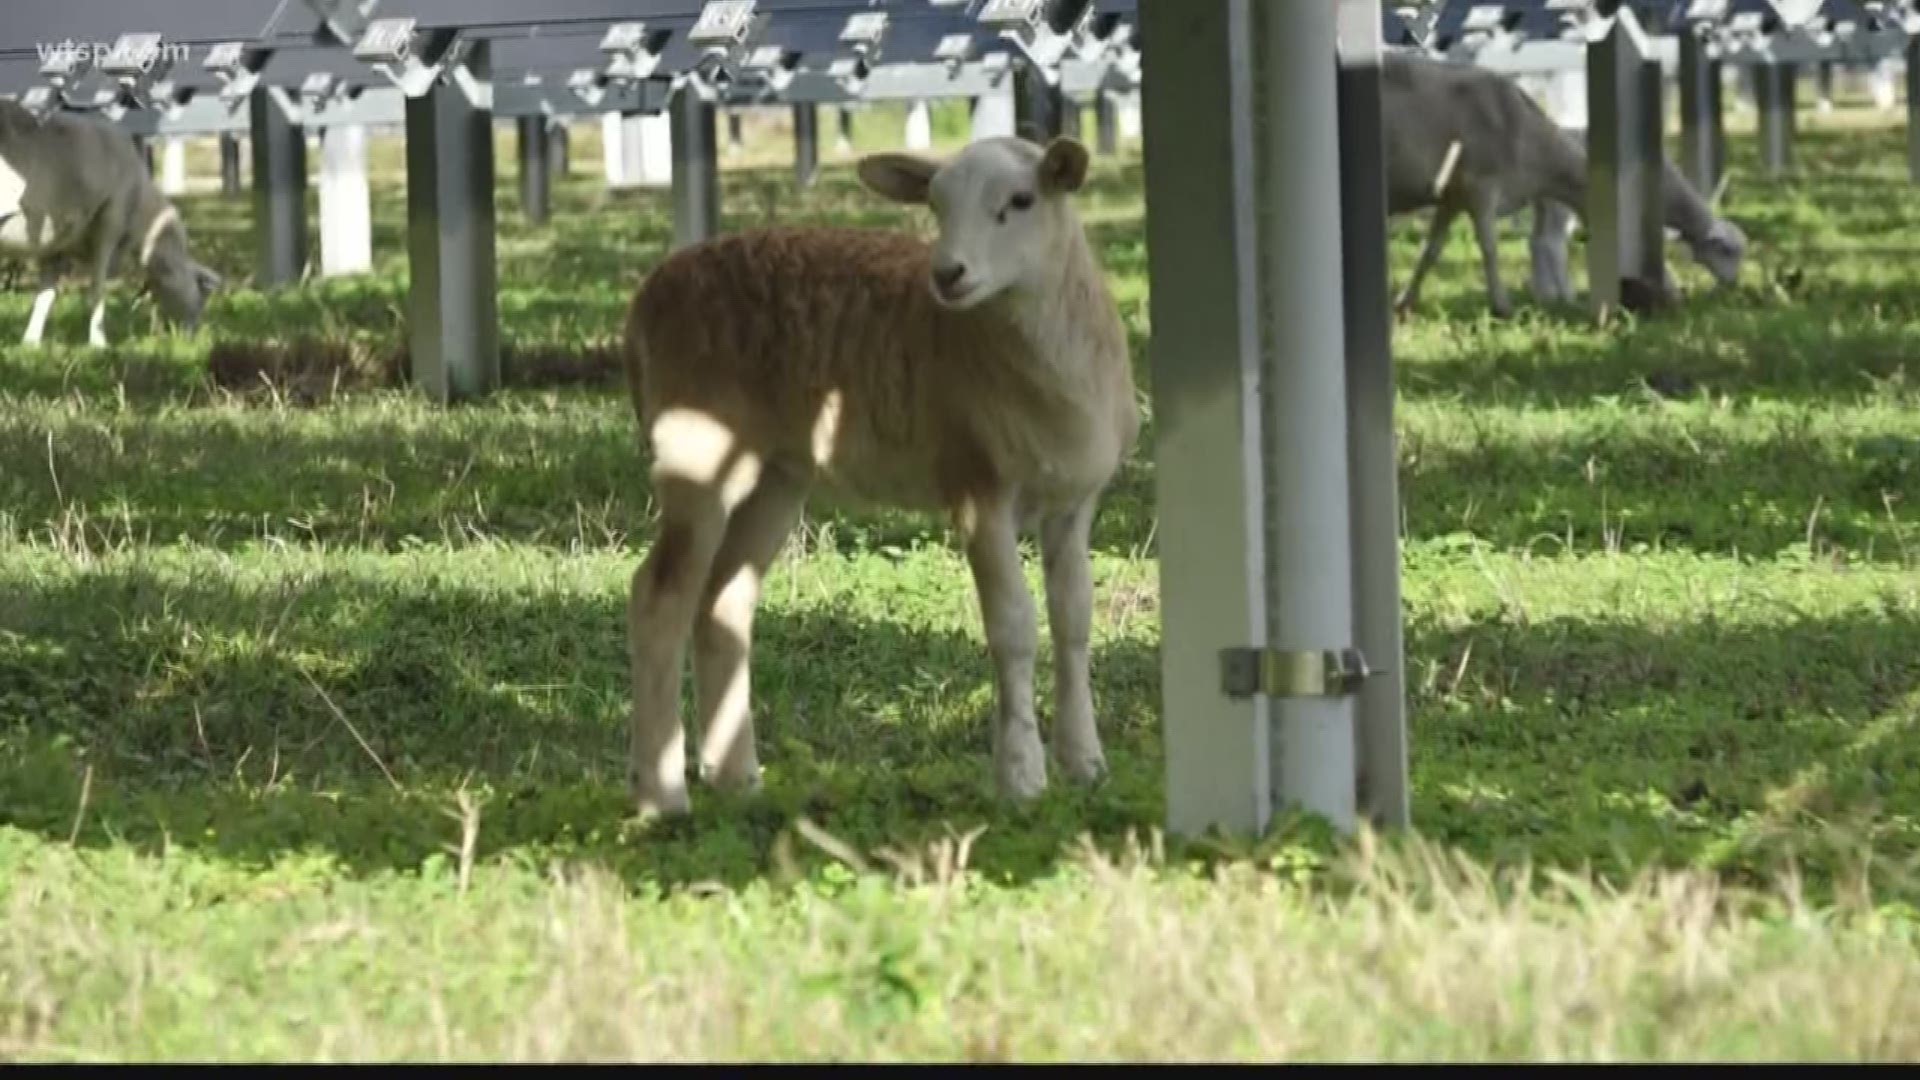 For the second year in a row, Tampa Electric turned on its webcam just in time for the grazing season at TECO’s solar fields in Apollo Beach.